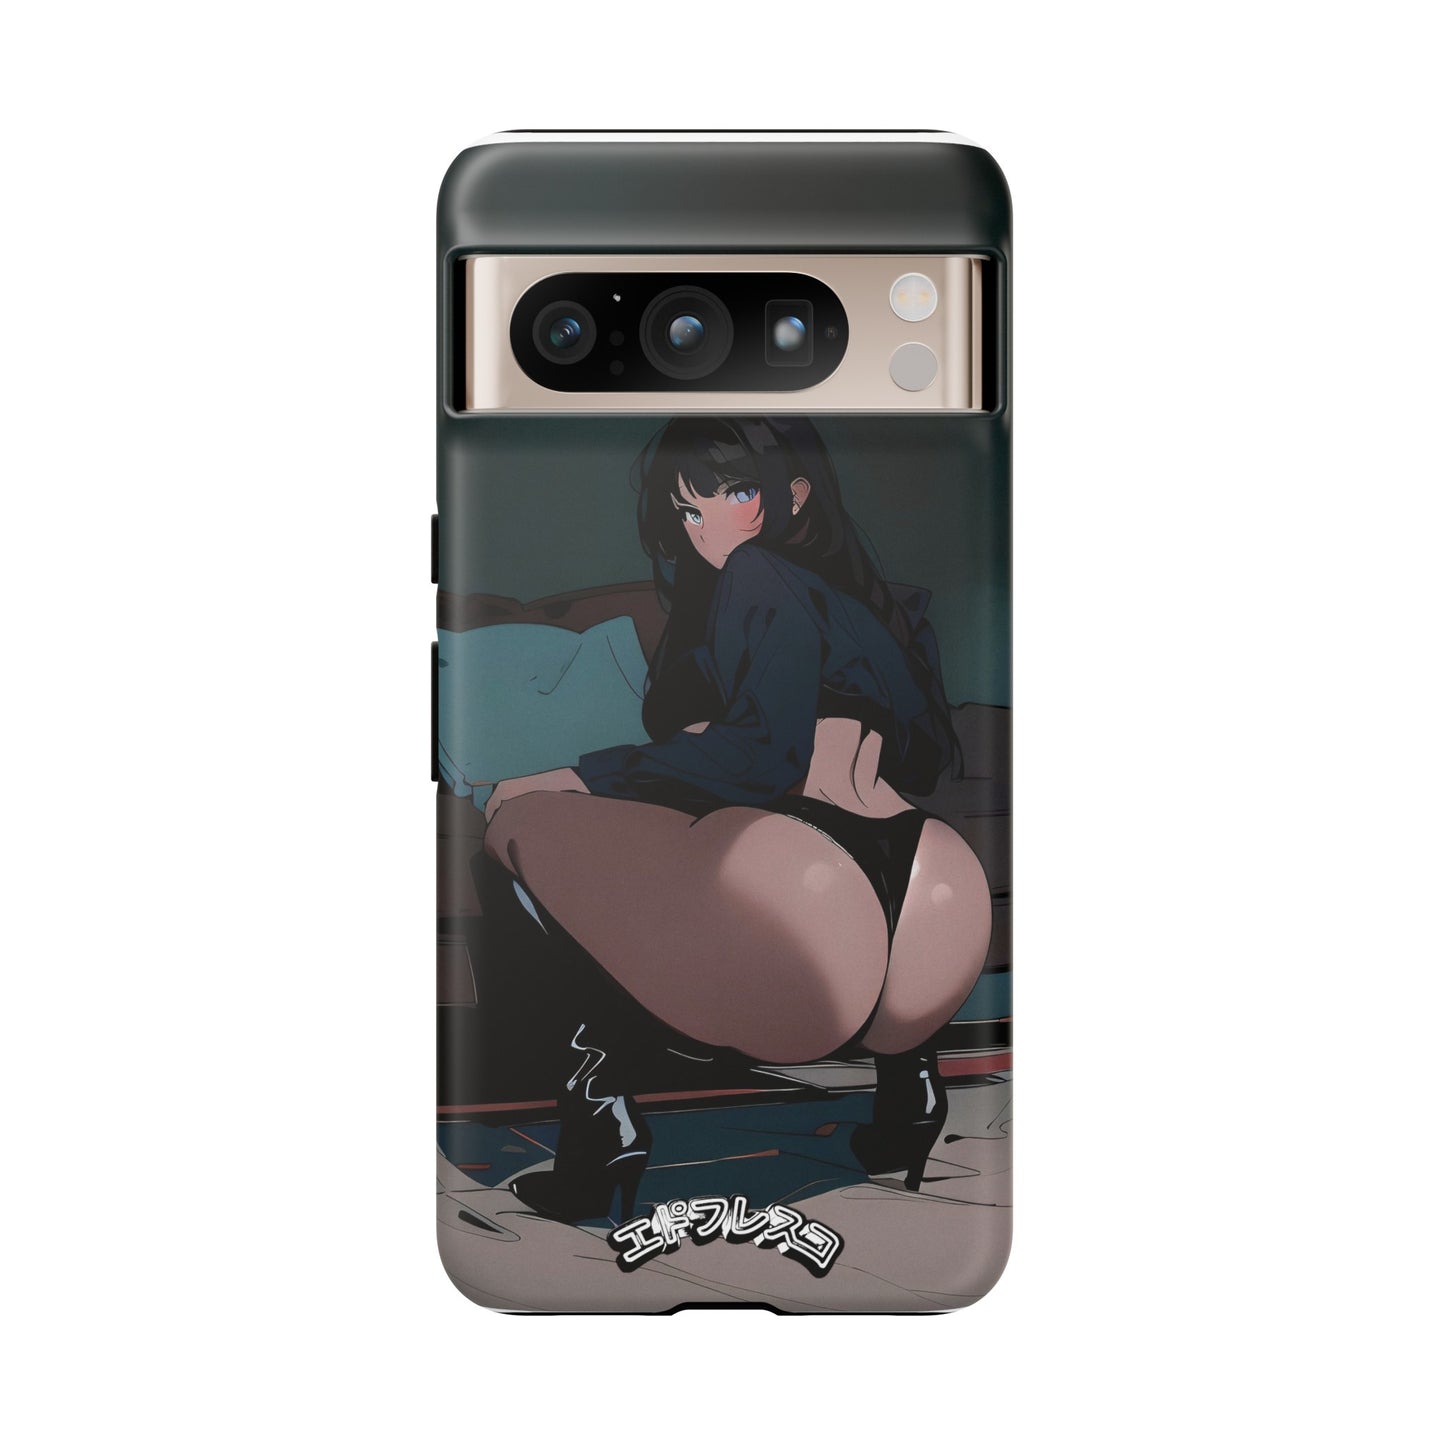 Anime Style Art Tough Cases- "Blessed"